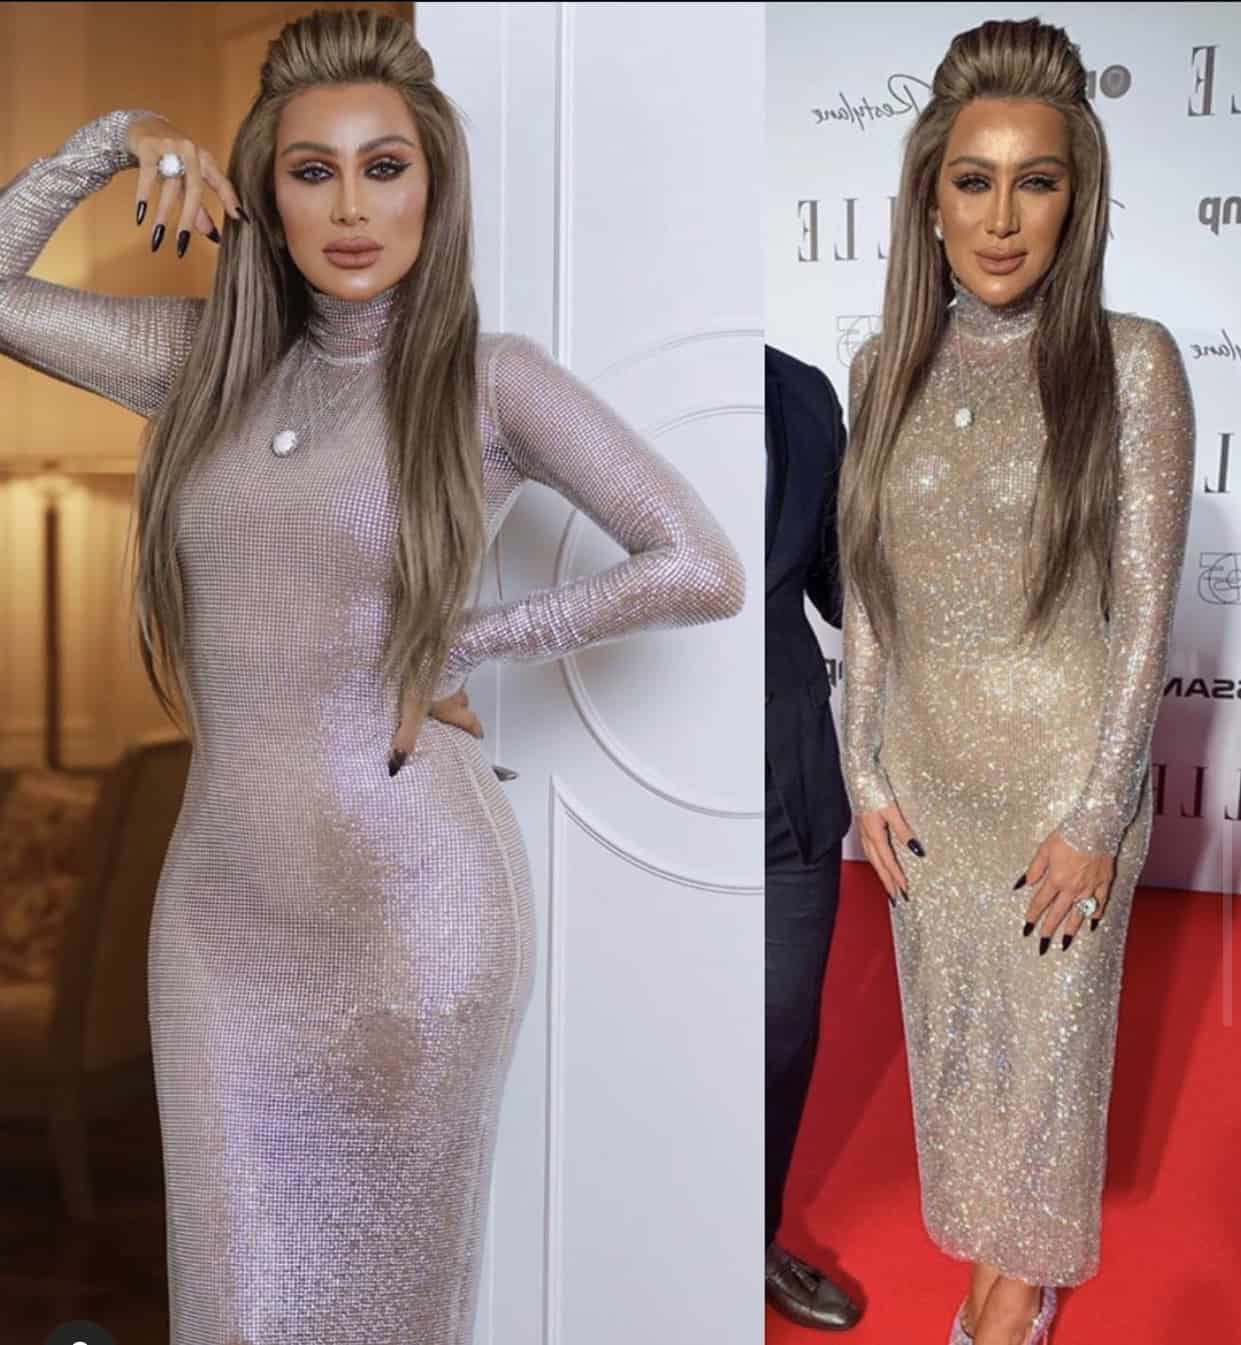 A major attack on Maya Diab because of Photoshop